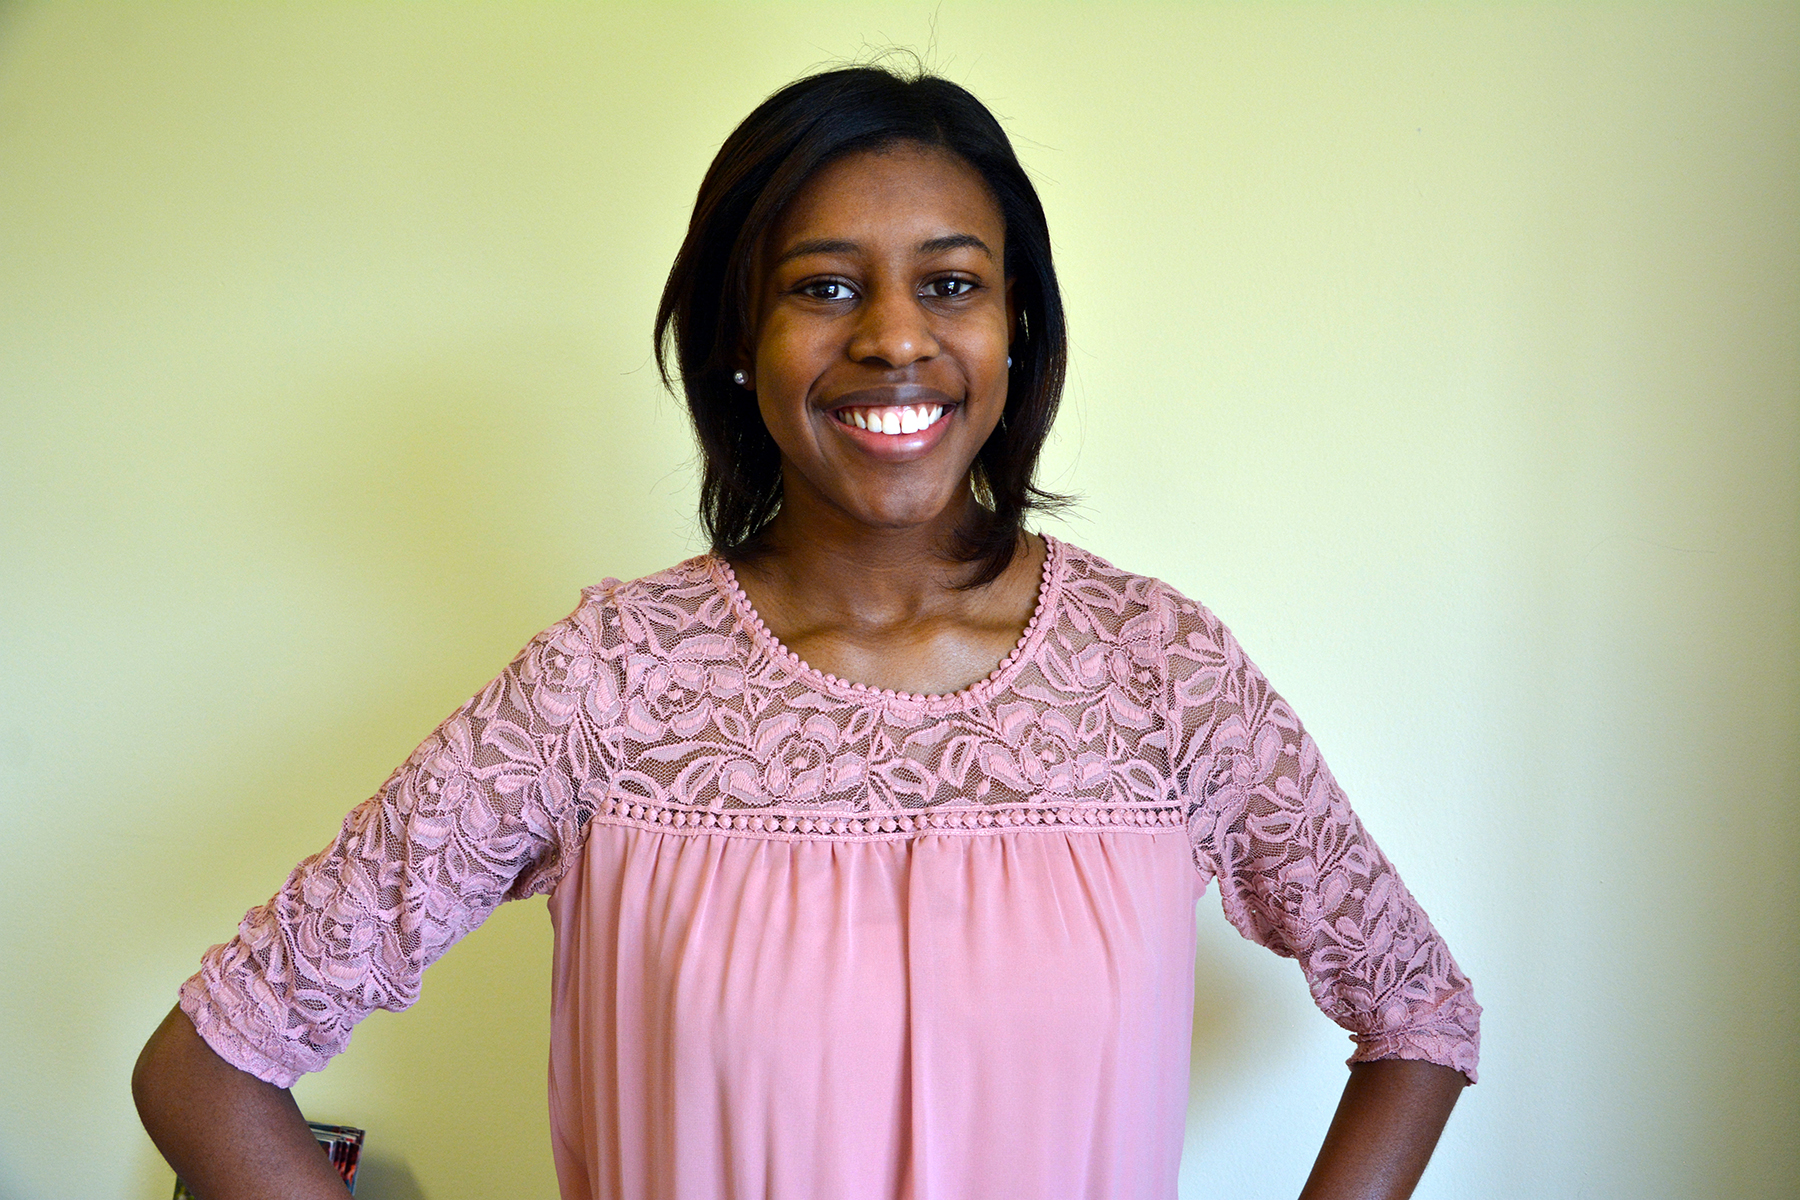 Jelisa Robinson plans to major in biology at Appalachian State University with a minor in Spanish. She wants to be a pediatric oncologist. With nearly an associate degree from Richmond Community College already completed, she is well on her way to junior status at Appalachian.